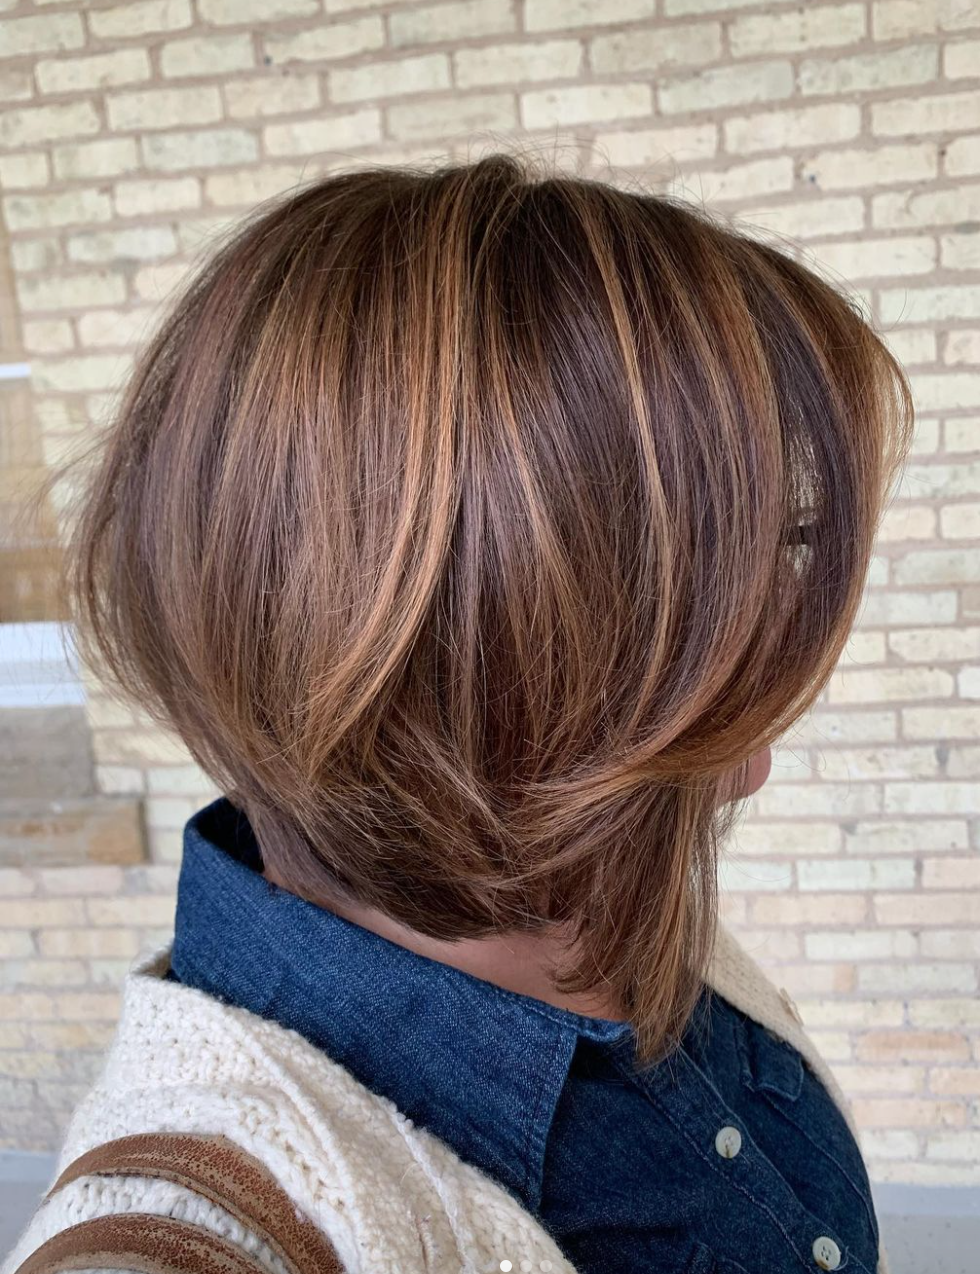 A short haircut on a woman with brown highlighted hair.